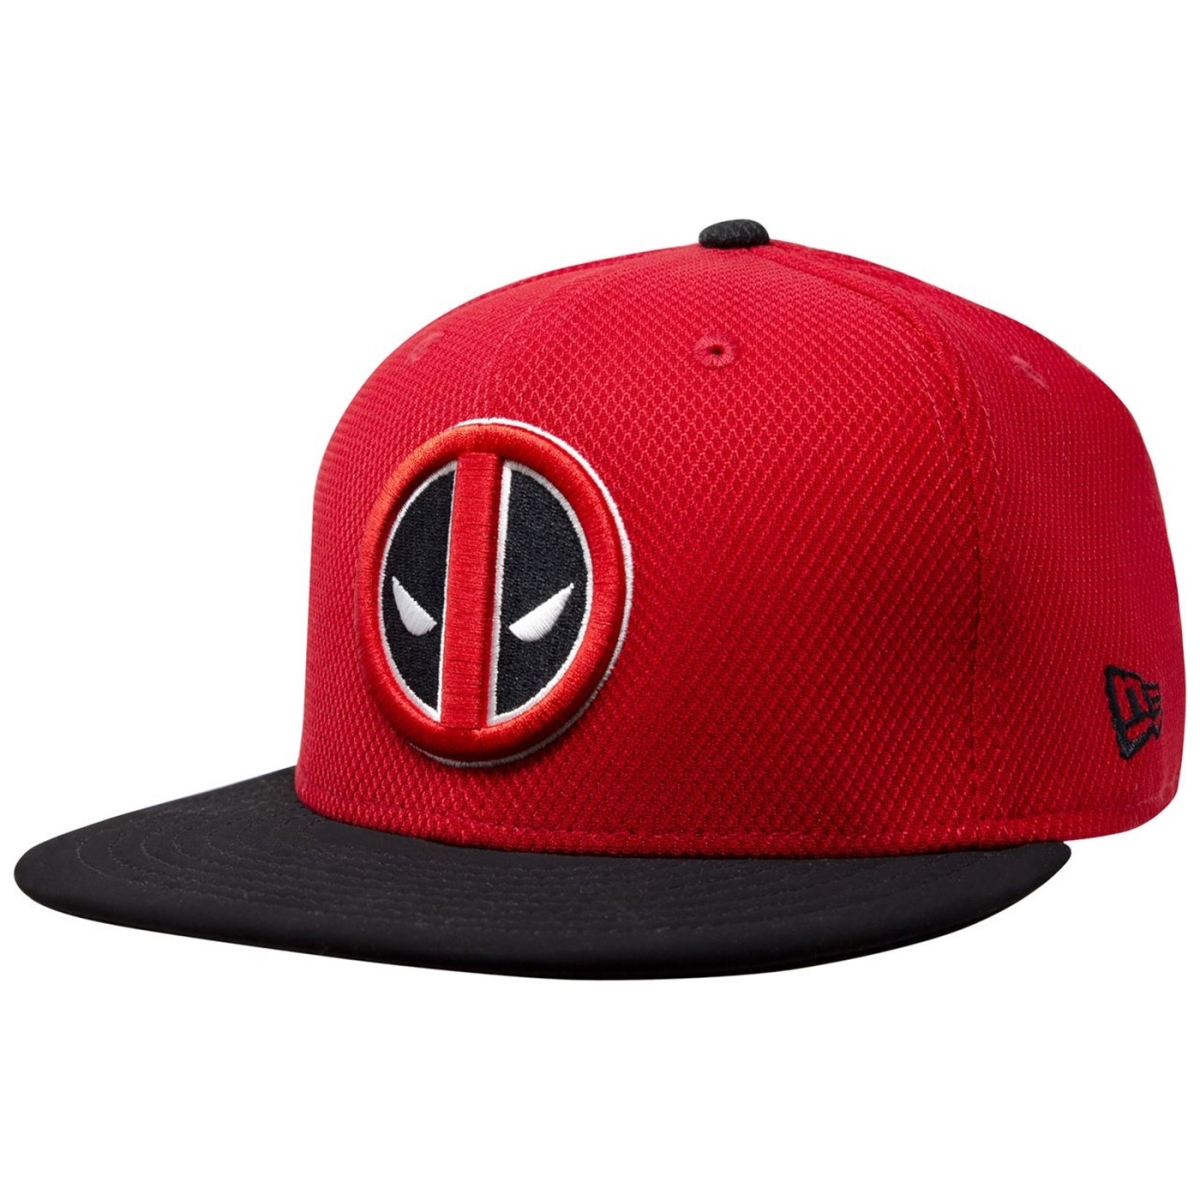 Picture of Deadpool hatdpsymrb5950-718-7 1-8 Fitted Deadpool Symbol Red & Black 59Fifty Fitted Hat - Size 7.125